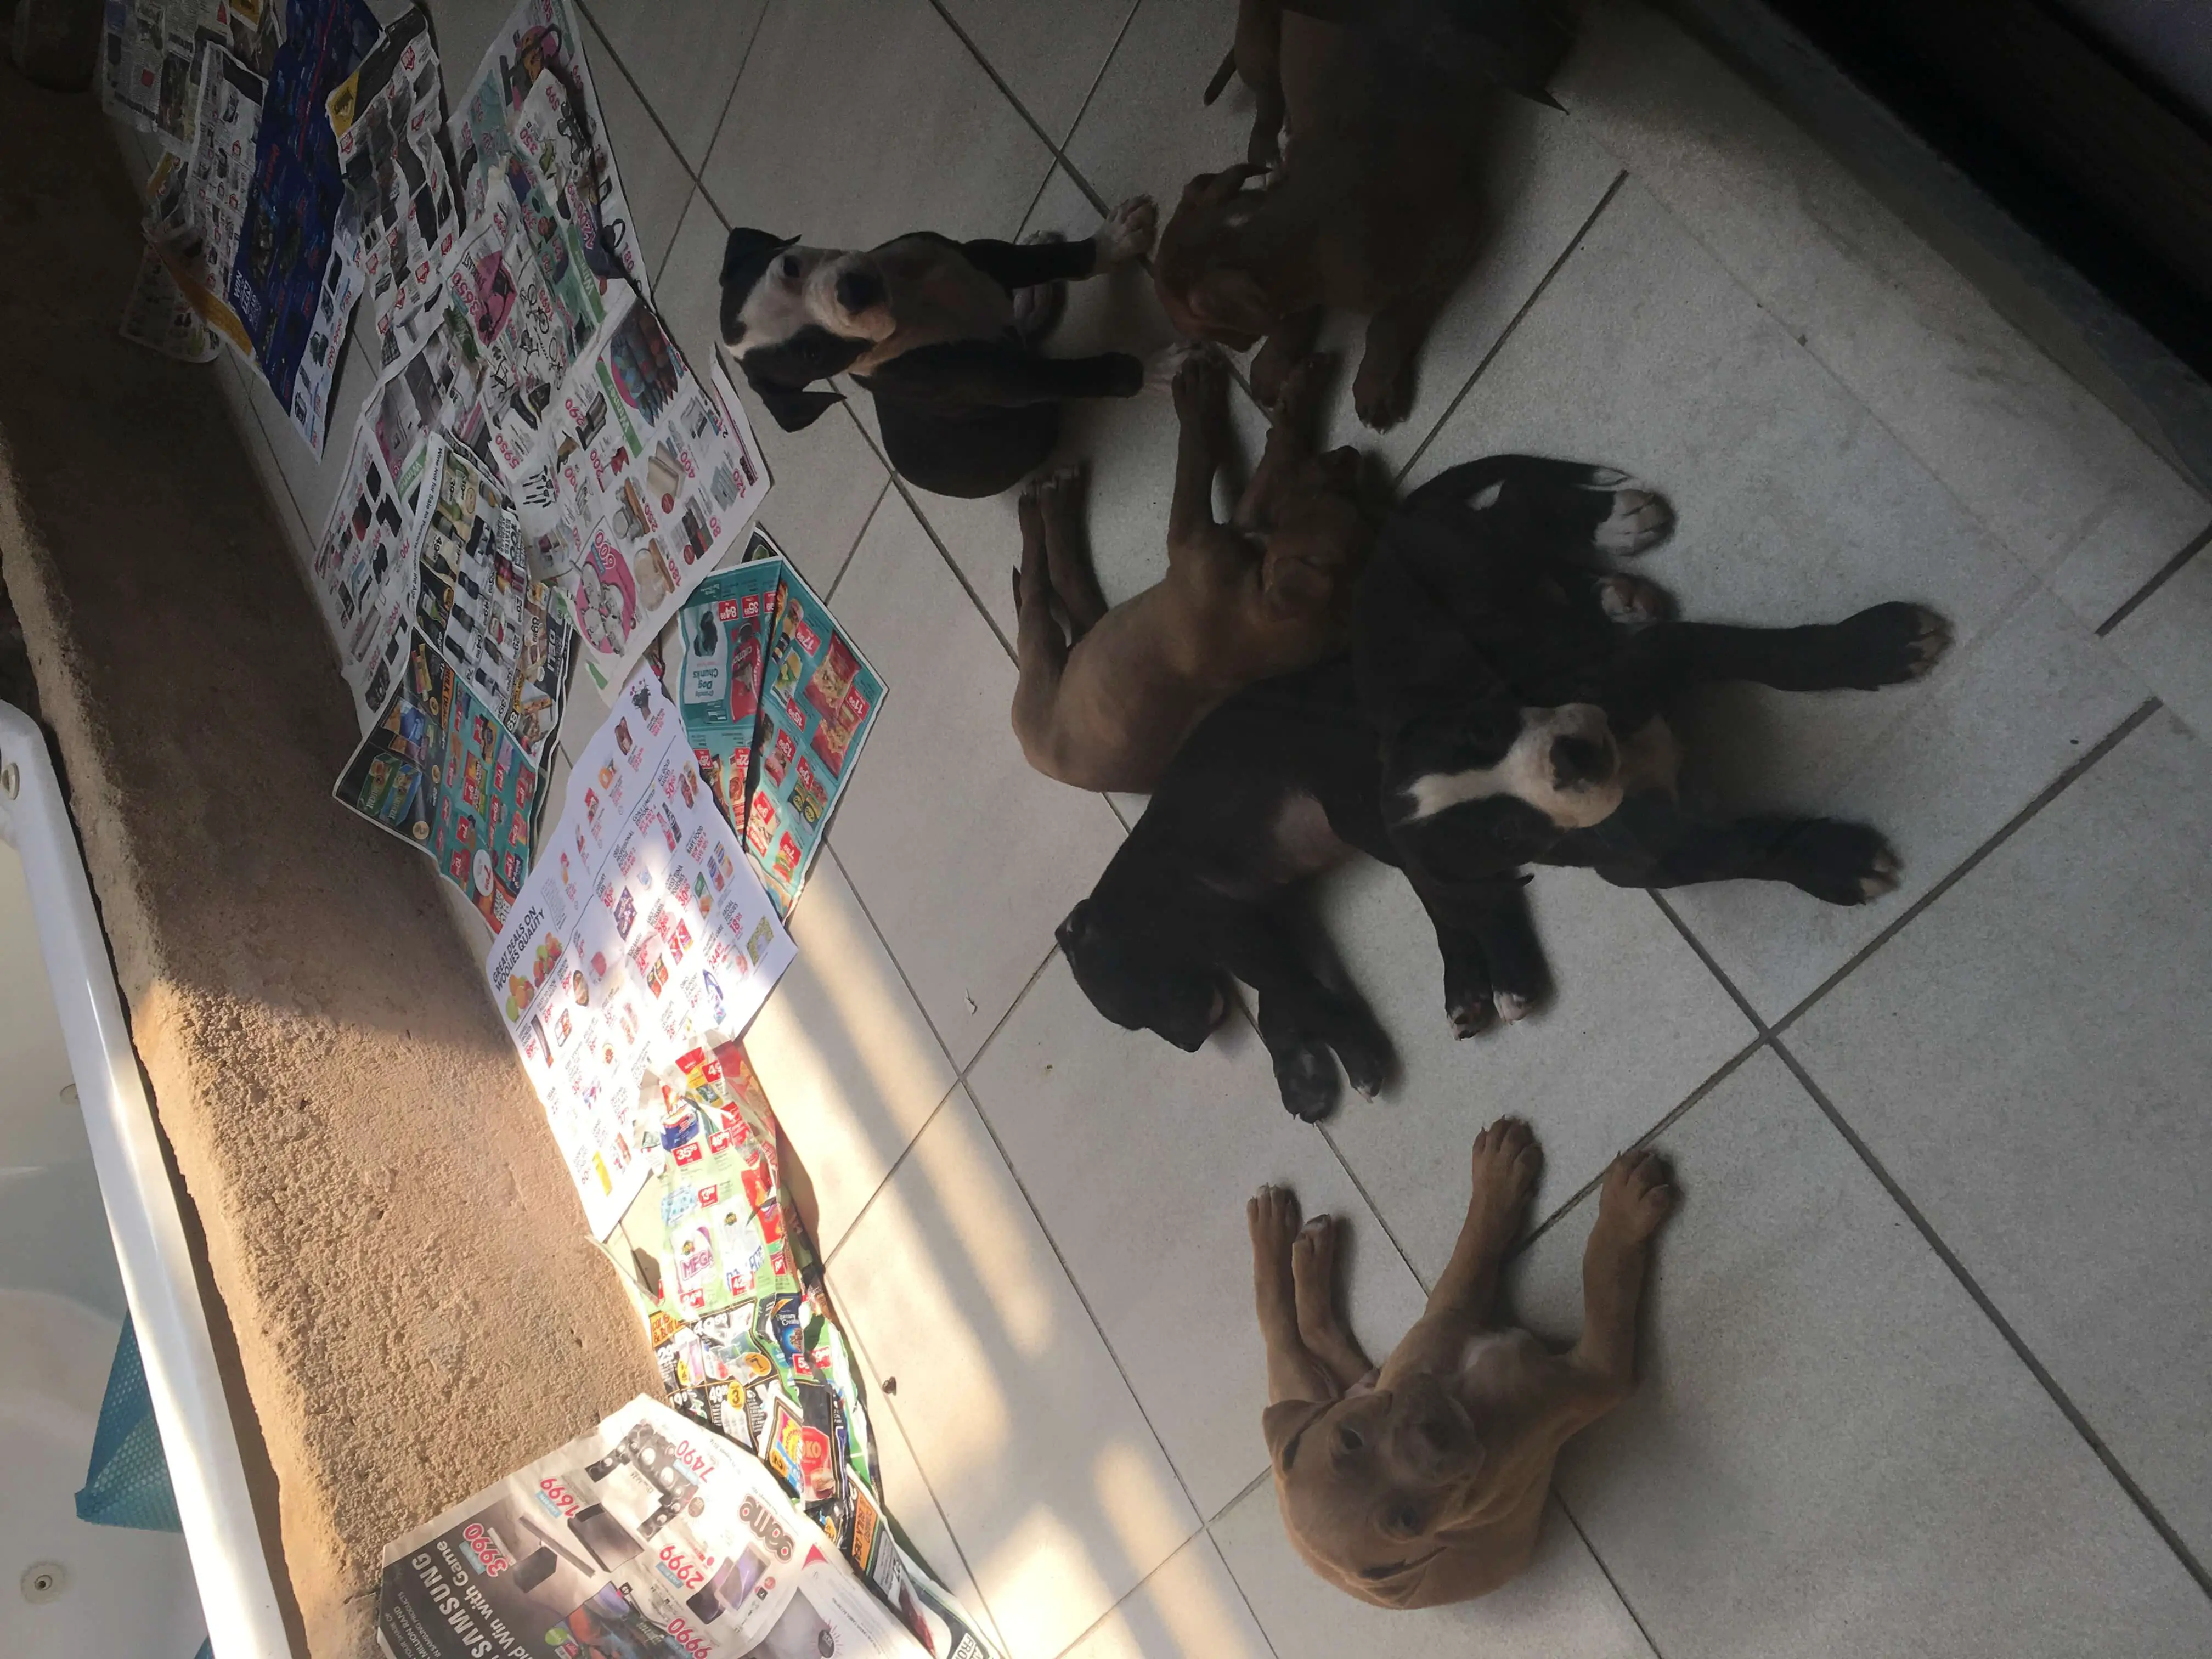 Pitbull Puppies for Sale in Johannesburg by Giancarlo de Figueiredo